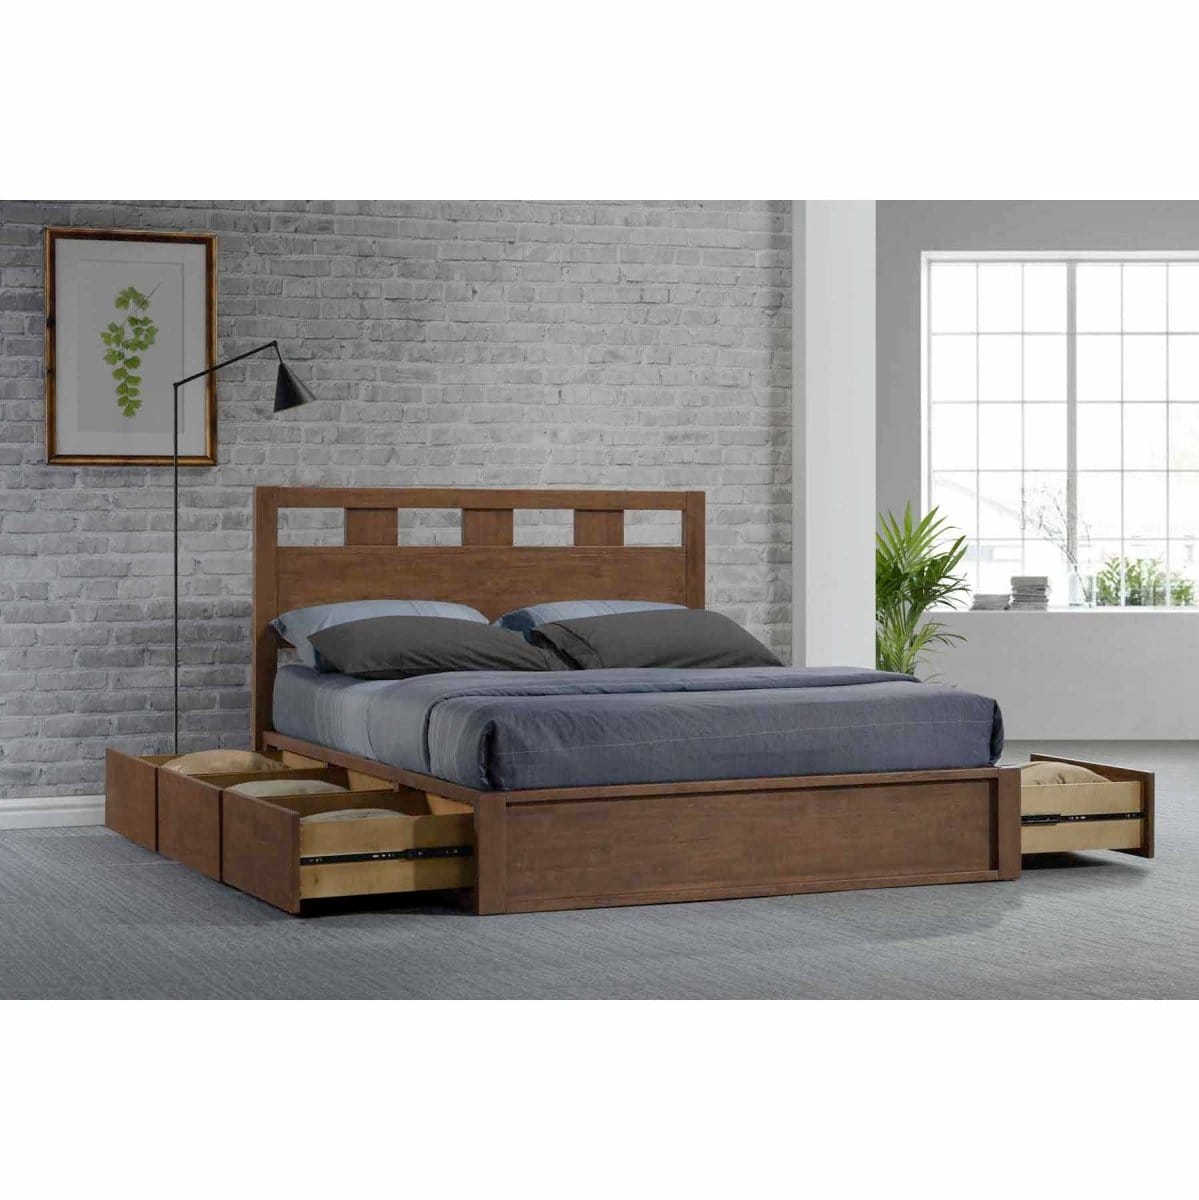 #1 Ashton 6-Drawer Solid Wood Queen Storage Bed ITG-1366B picket and rail